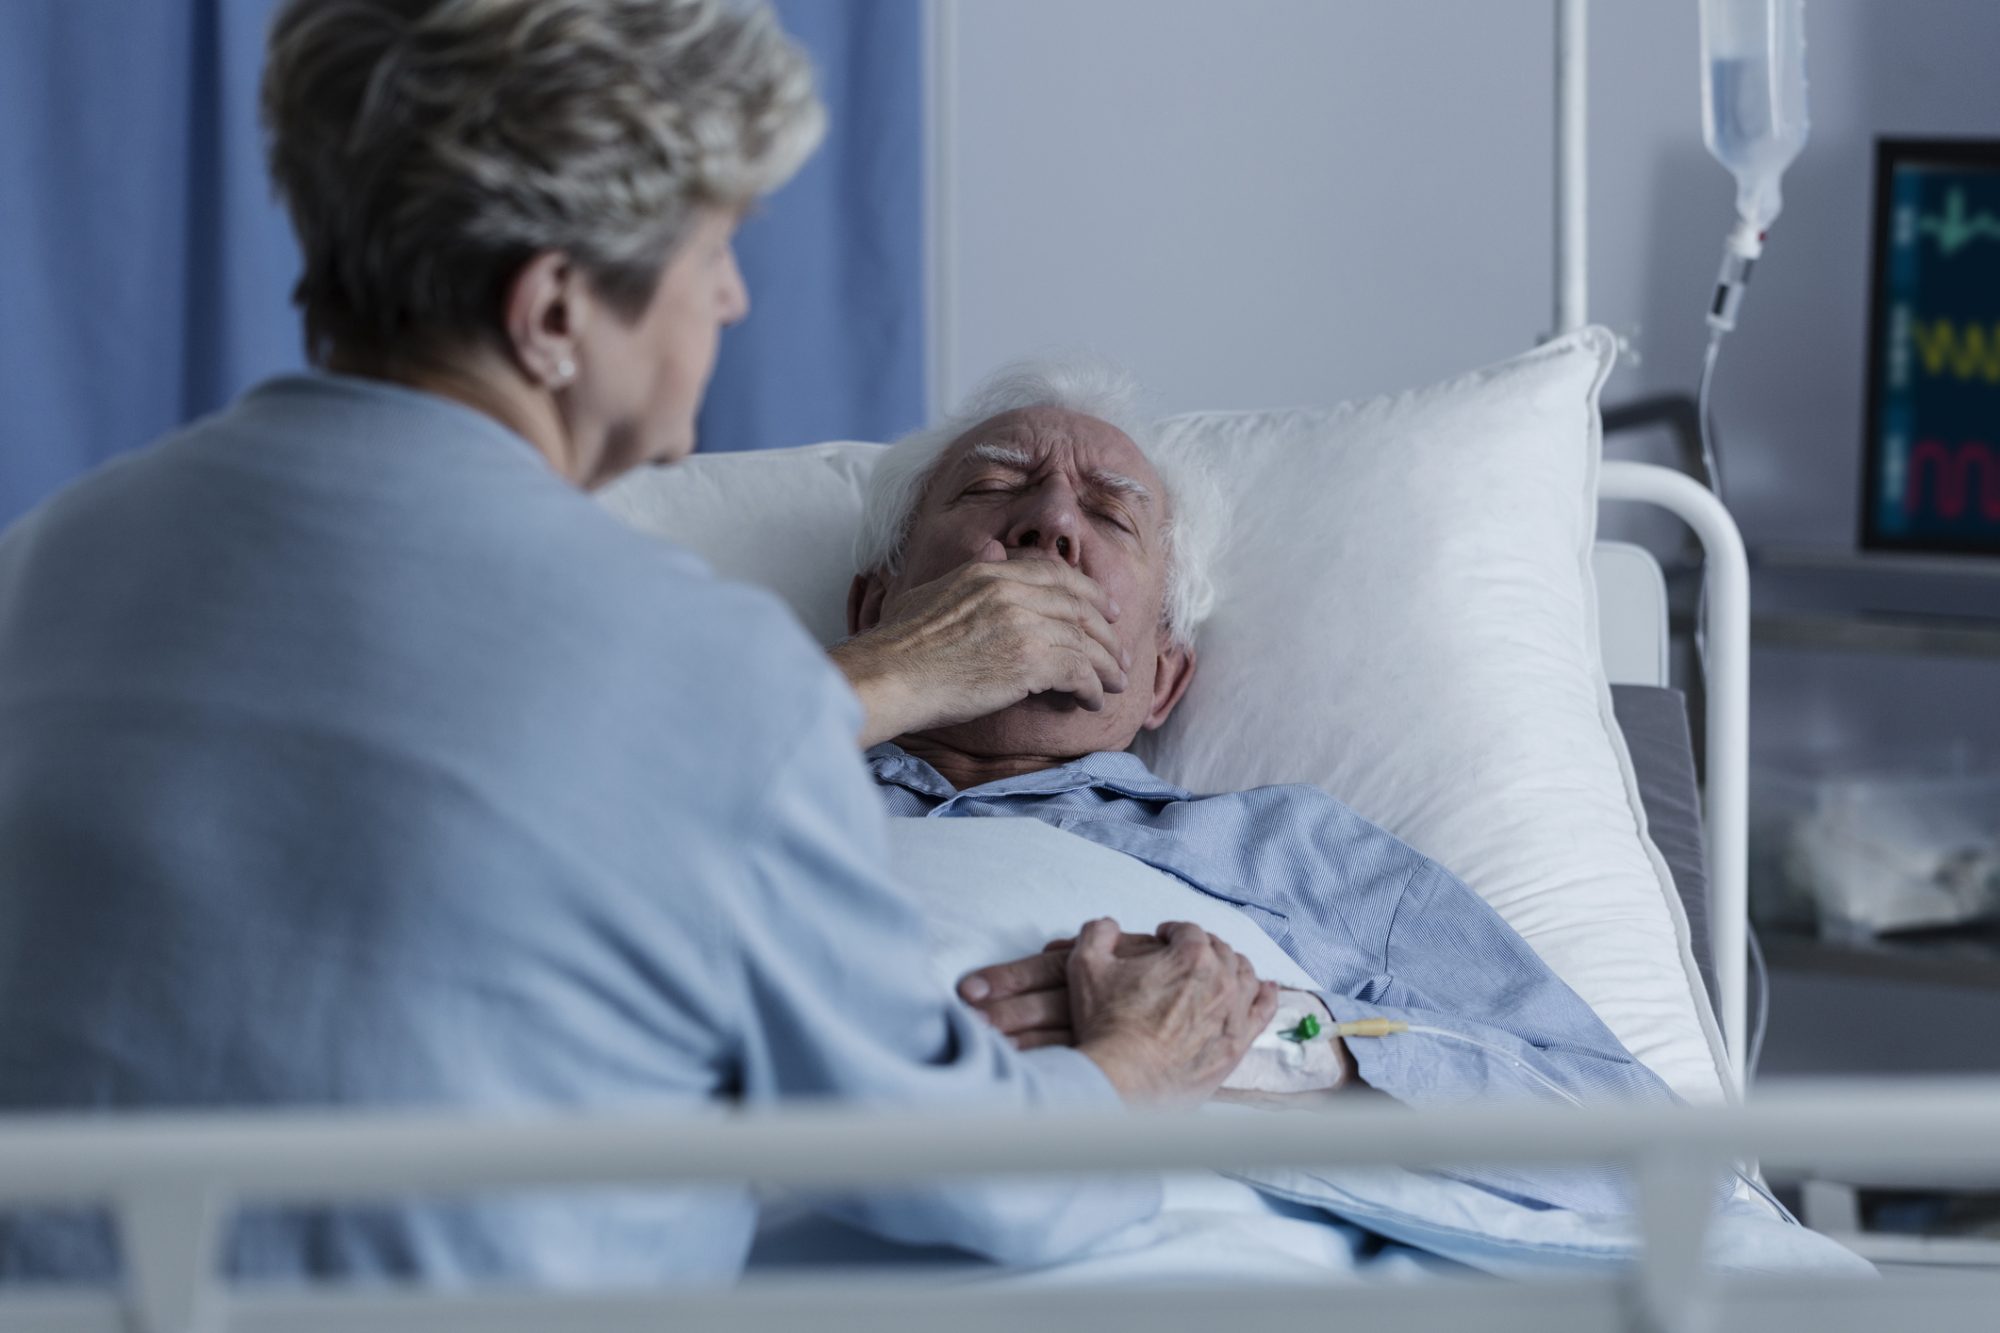 Elderly man in hospital bed with a lung condition